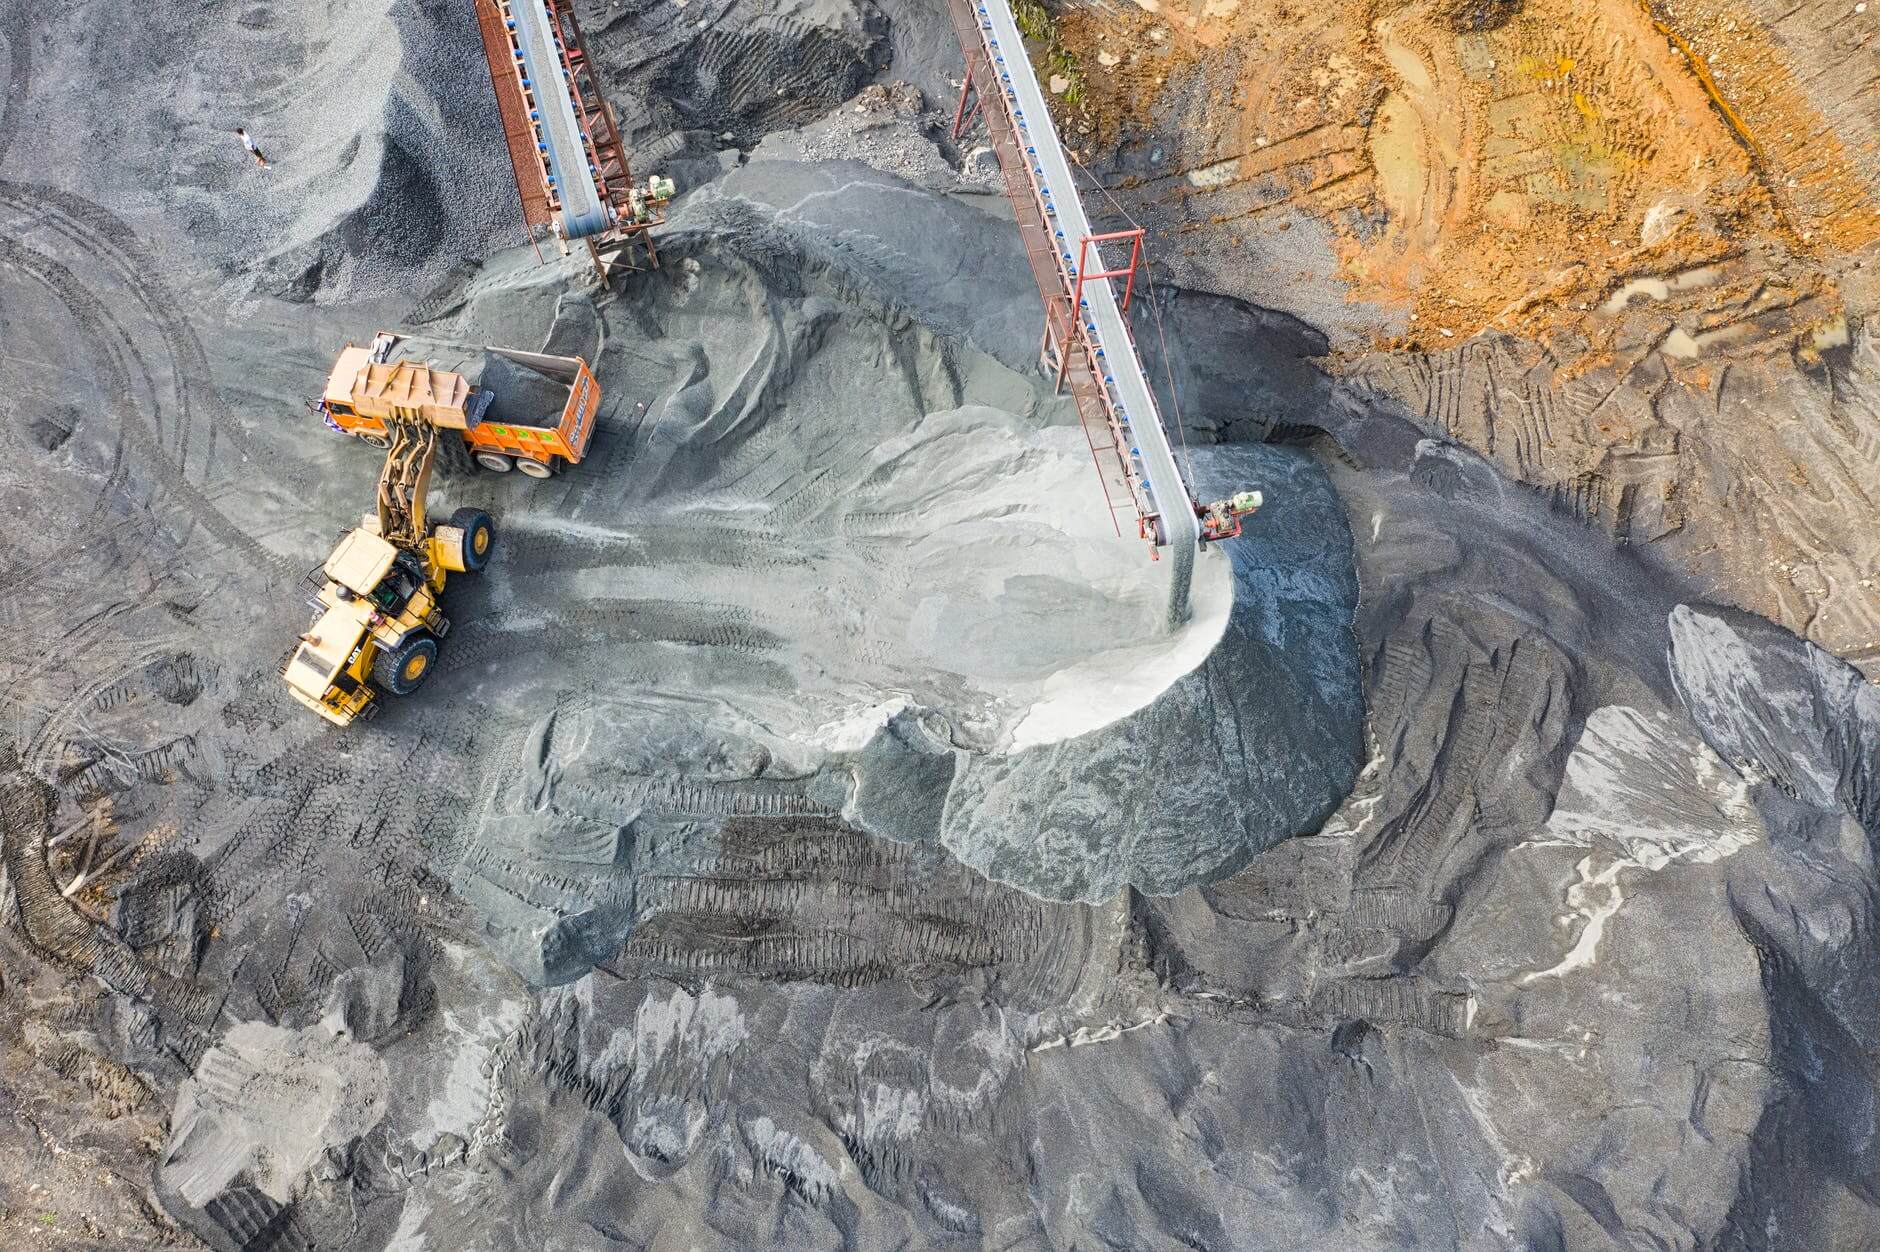 Aerial image of a strip coal mine, representing how black lung defense lawyer James. “Mac” Heslep at Jenkins Fenstermaker helps businesses at risk of black lung claims.